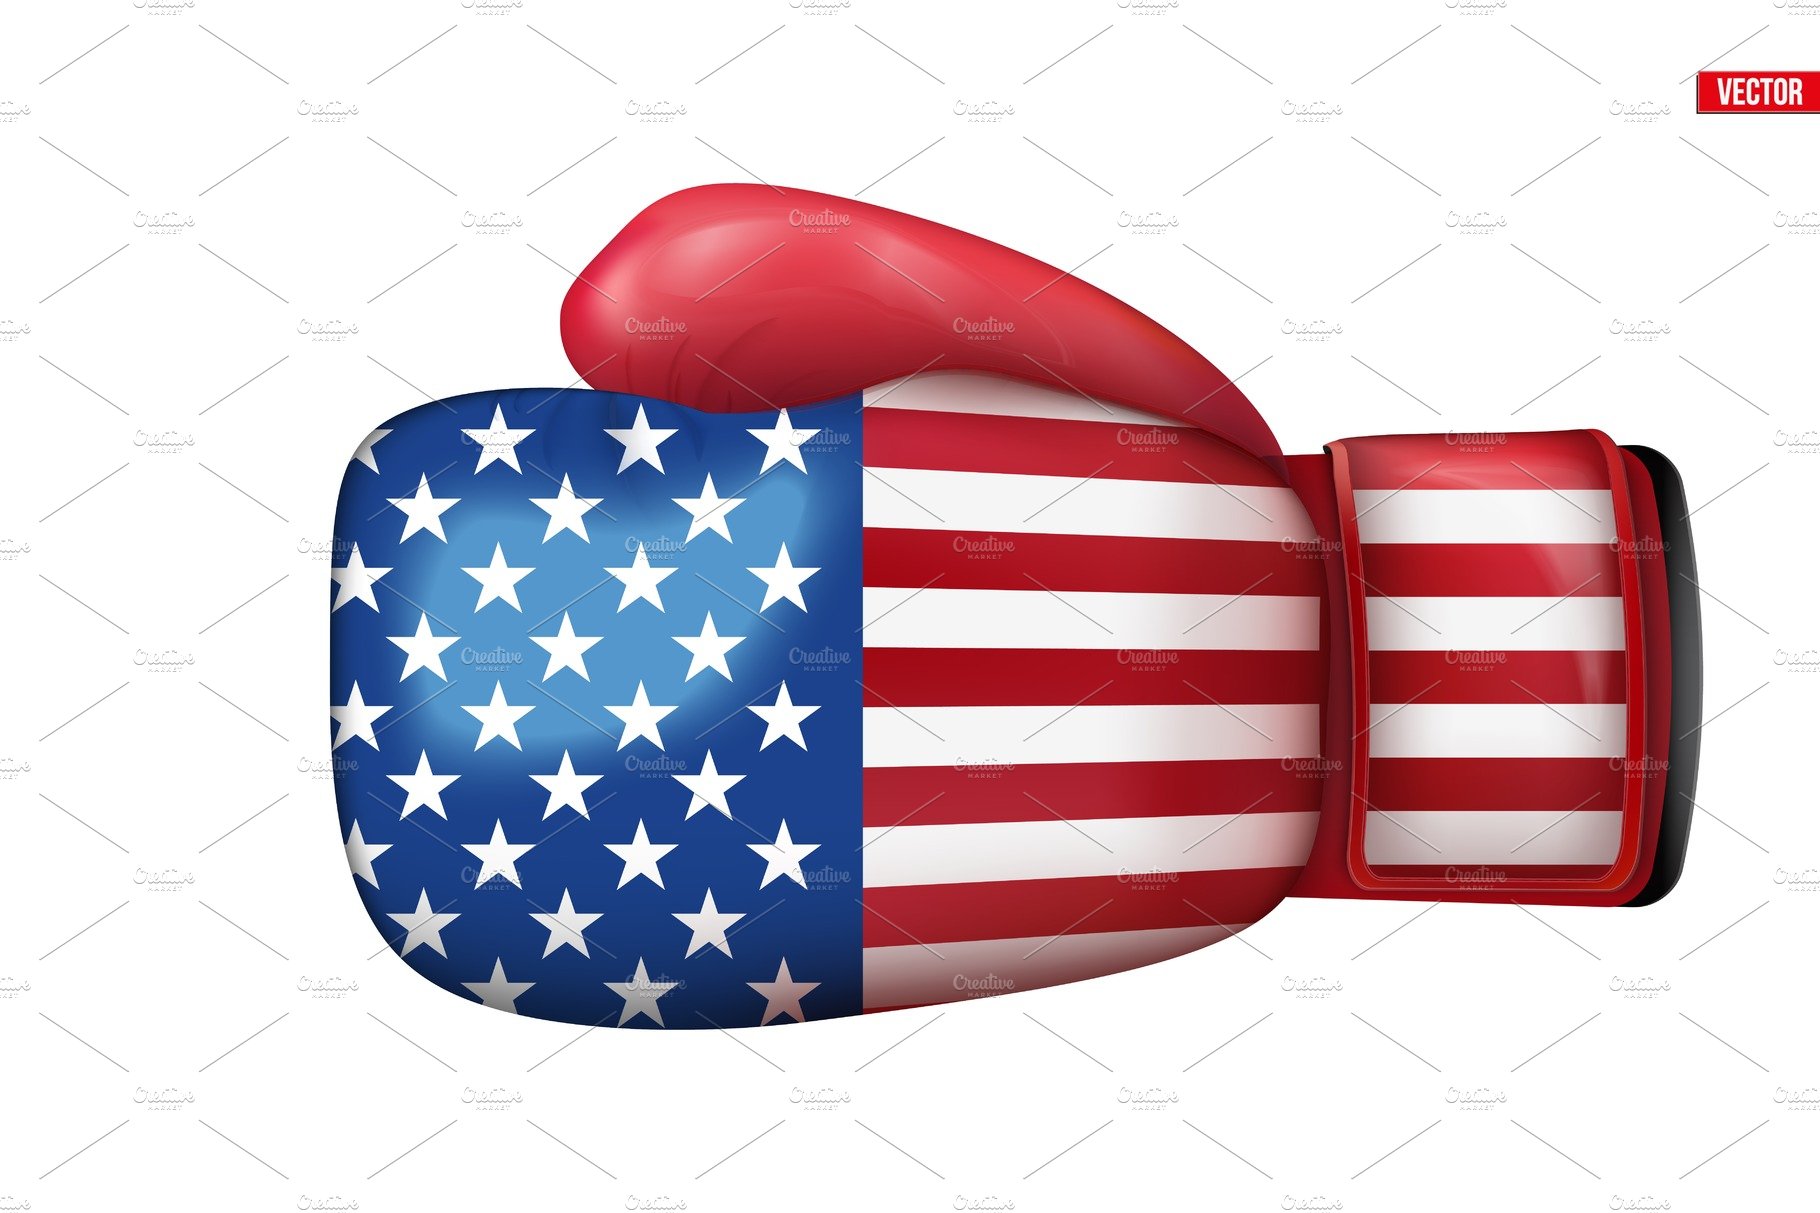 Boxing gloves with USA Flag cover image.